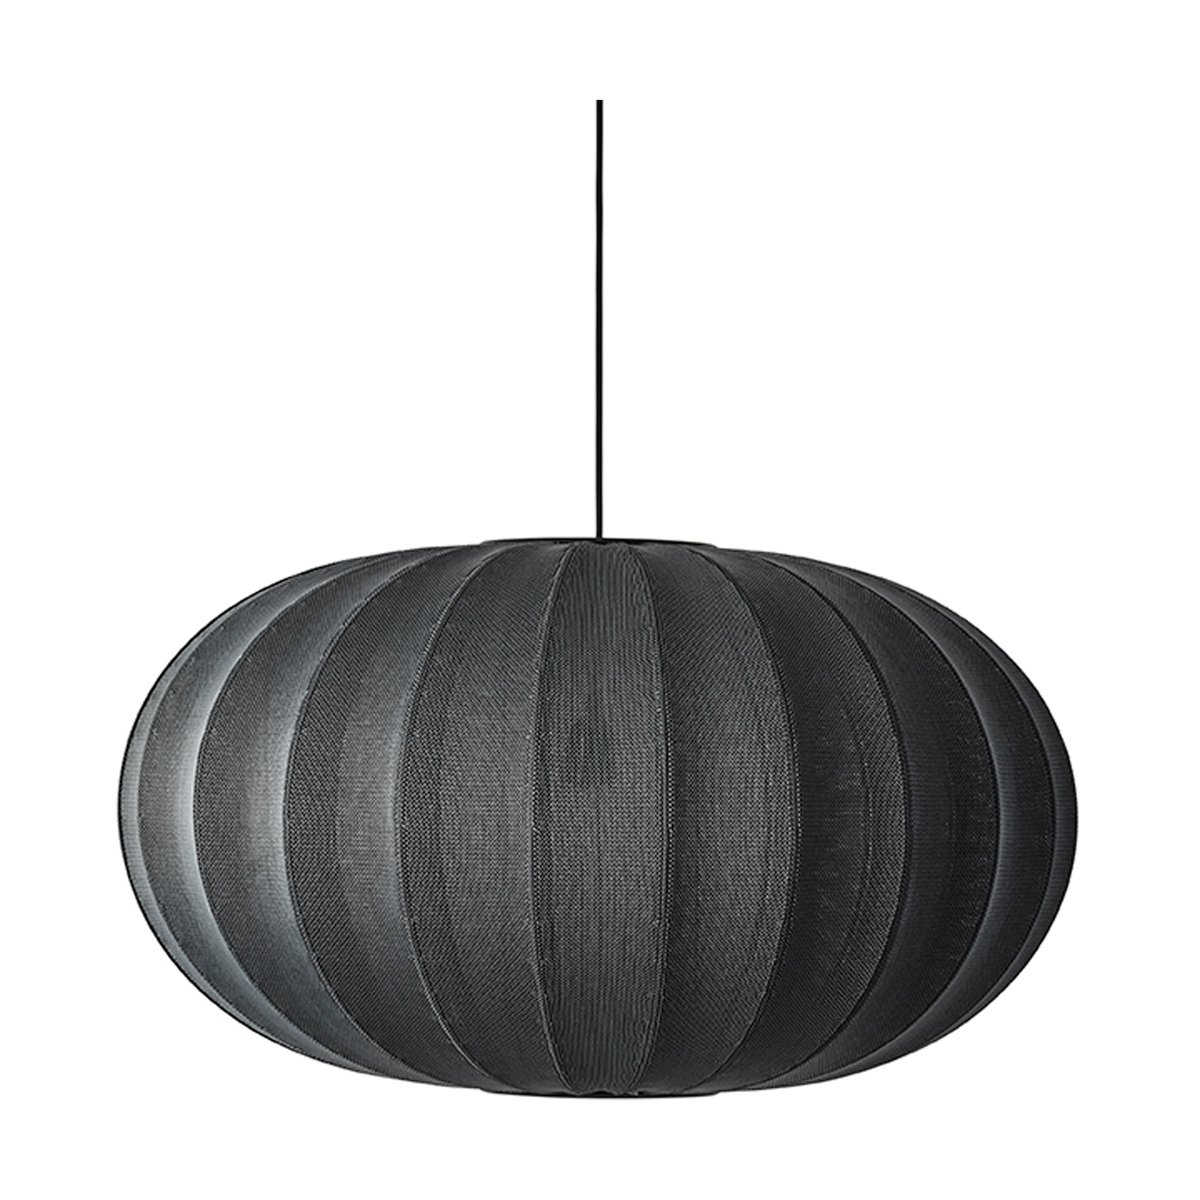 Made By Hand Knit-Wit 76 Oval hanglamp Black